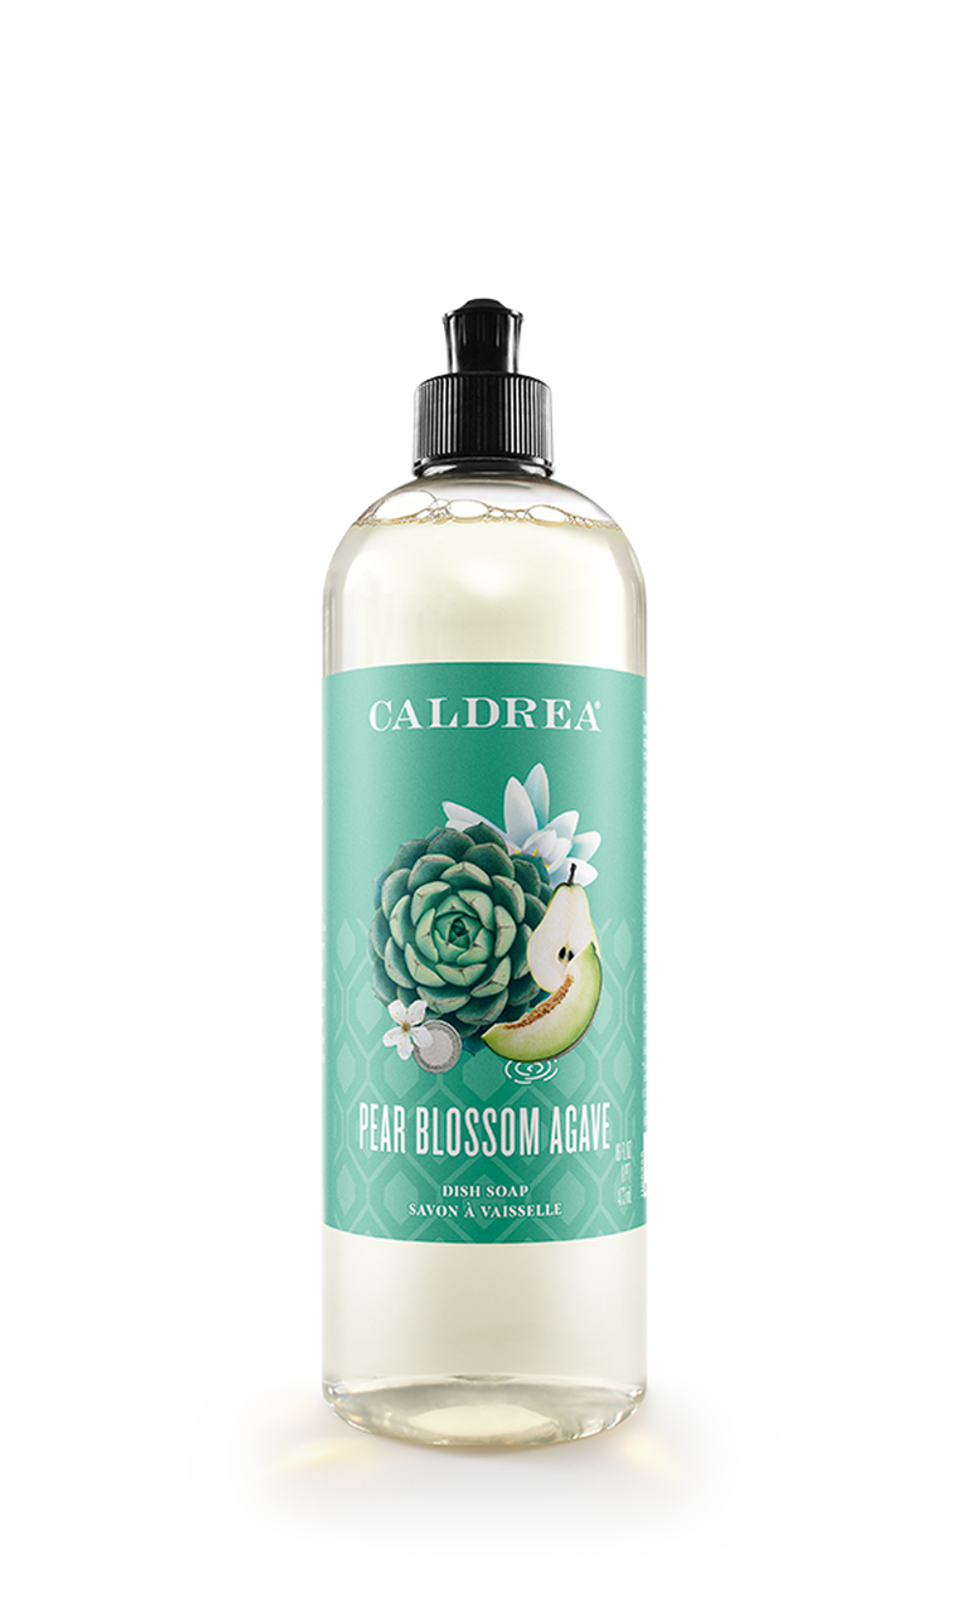 Pear Blossom Agave Home Care by Caledrea